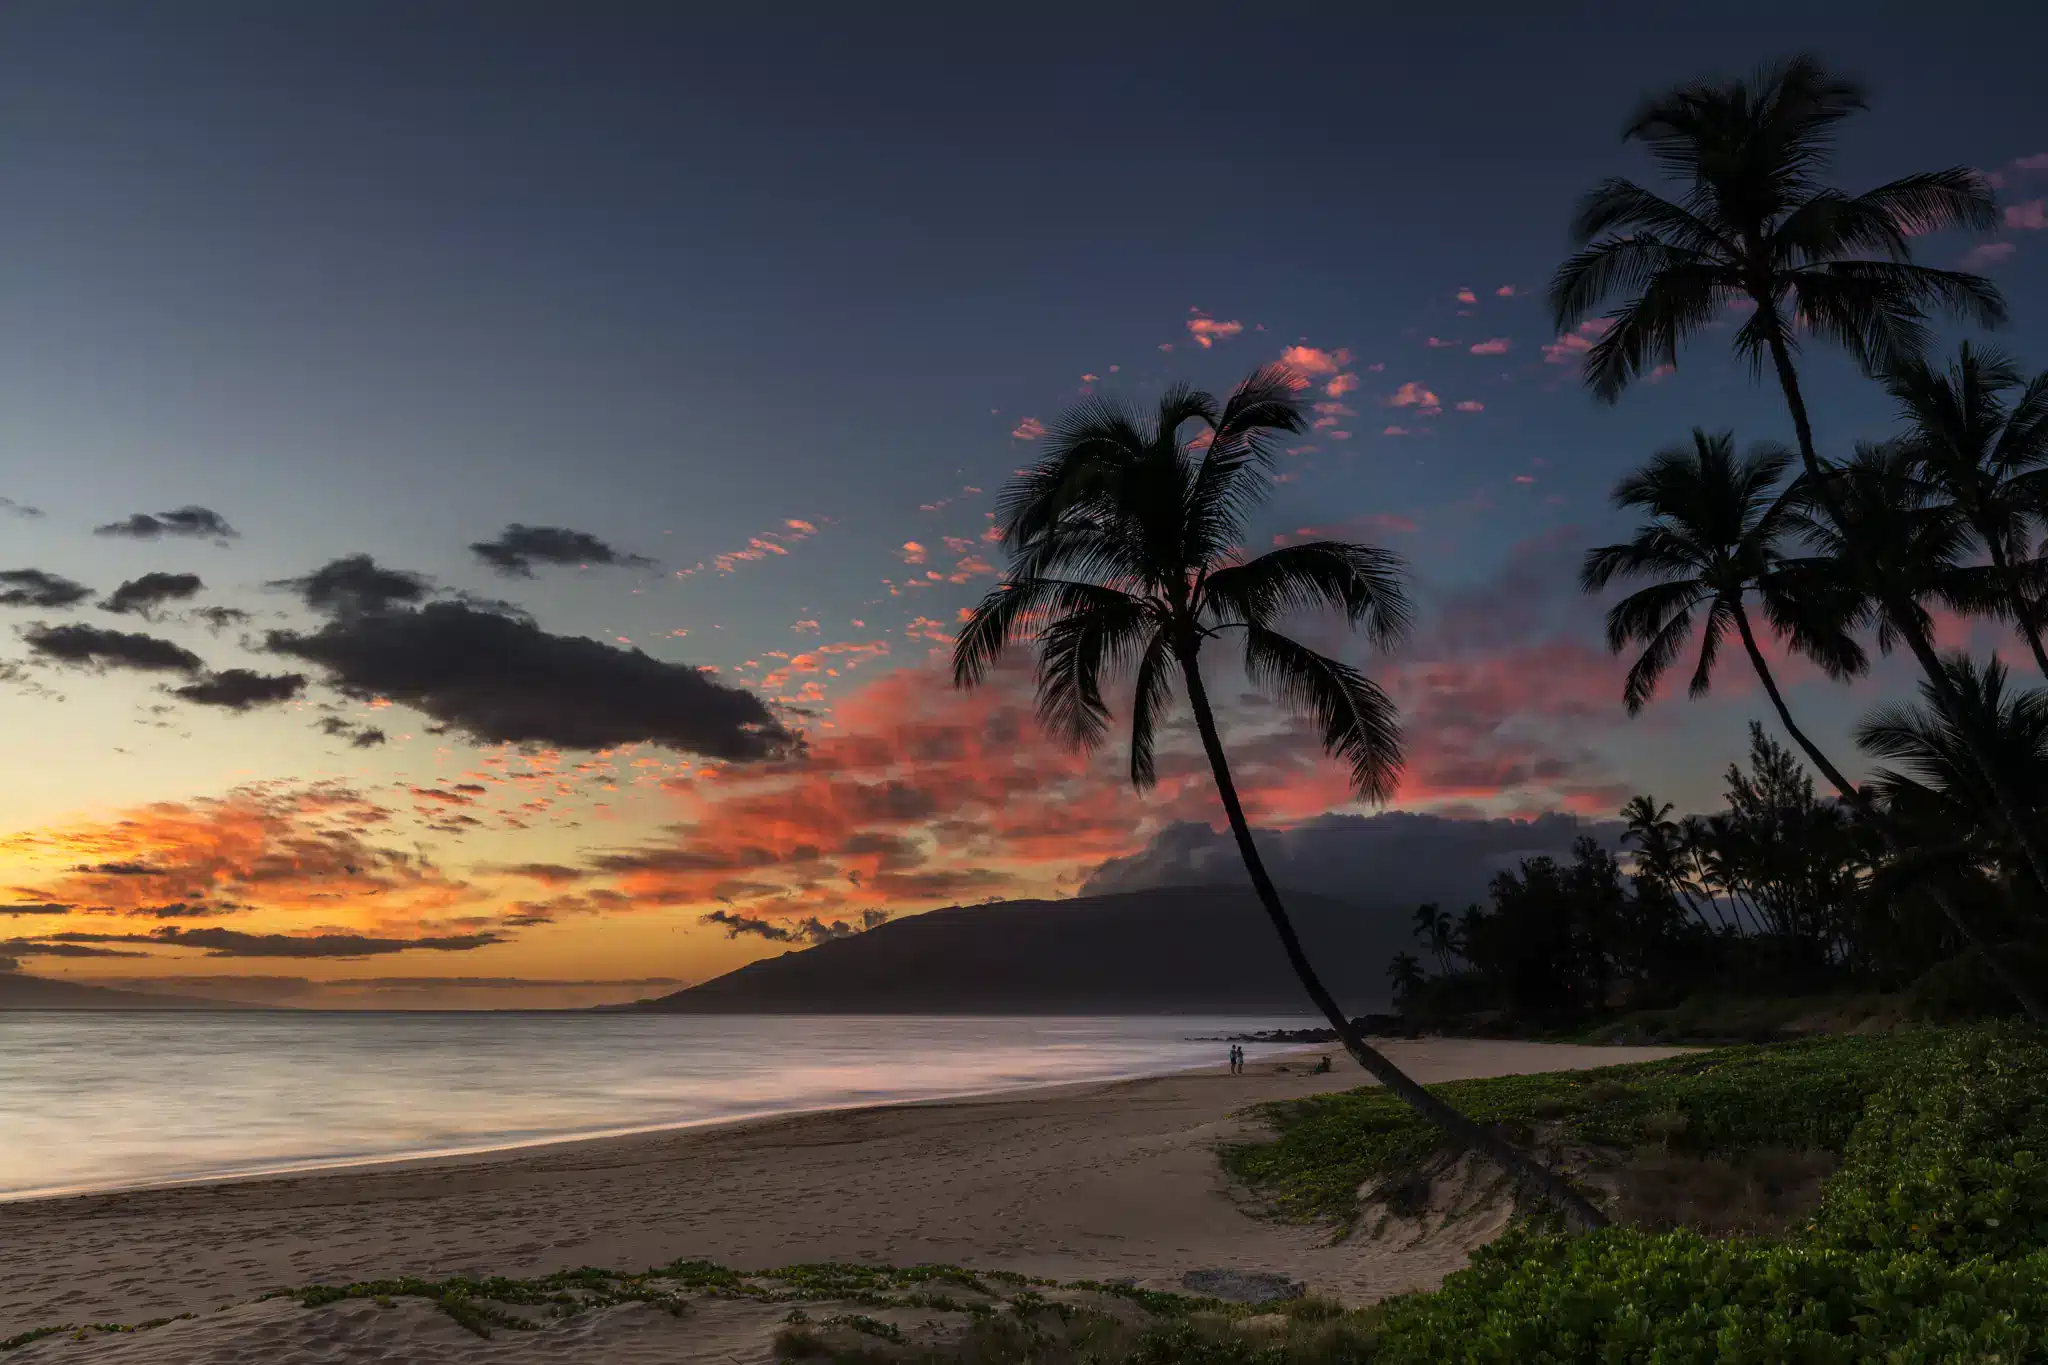 Charley Young Beach is a Beach located in the city of Kihei on Maui, Hawaii